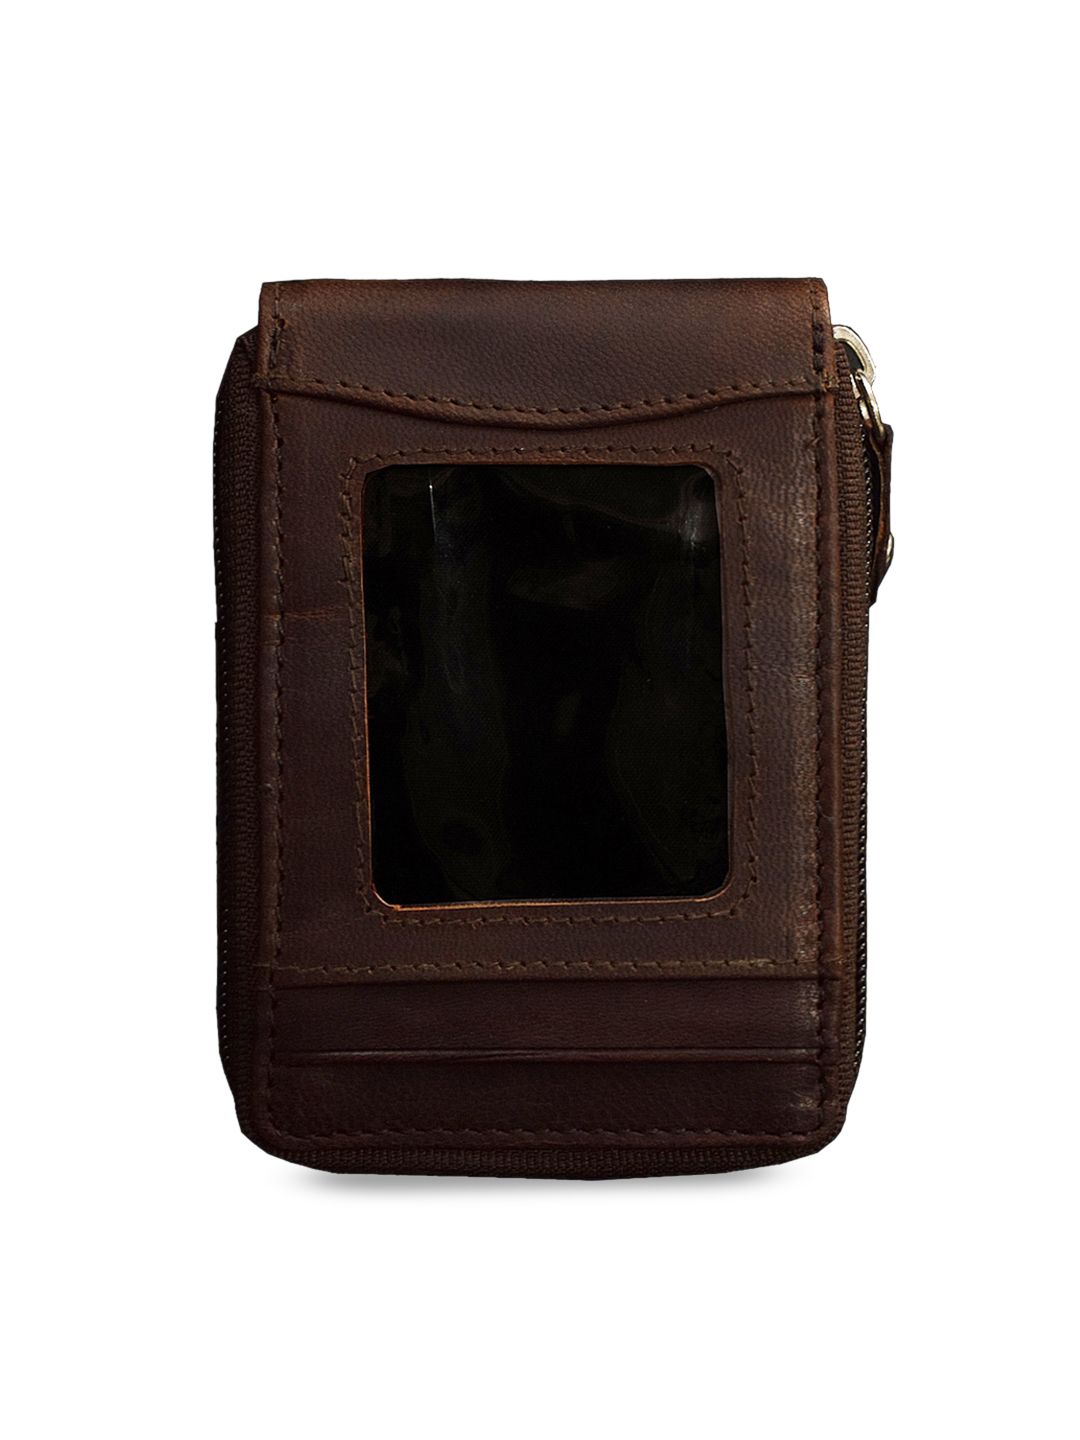 ABYS Unisex Coffee Brown Solid Zip Around Wallet Price in India